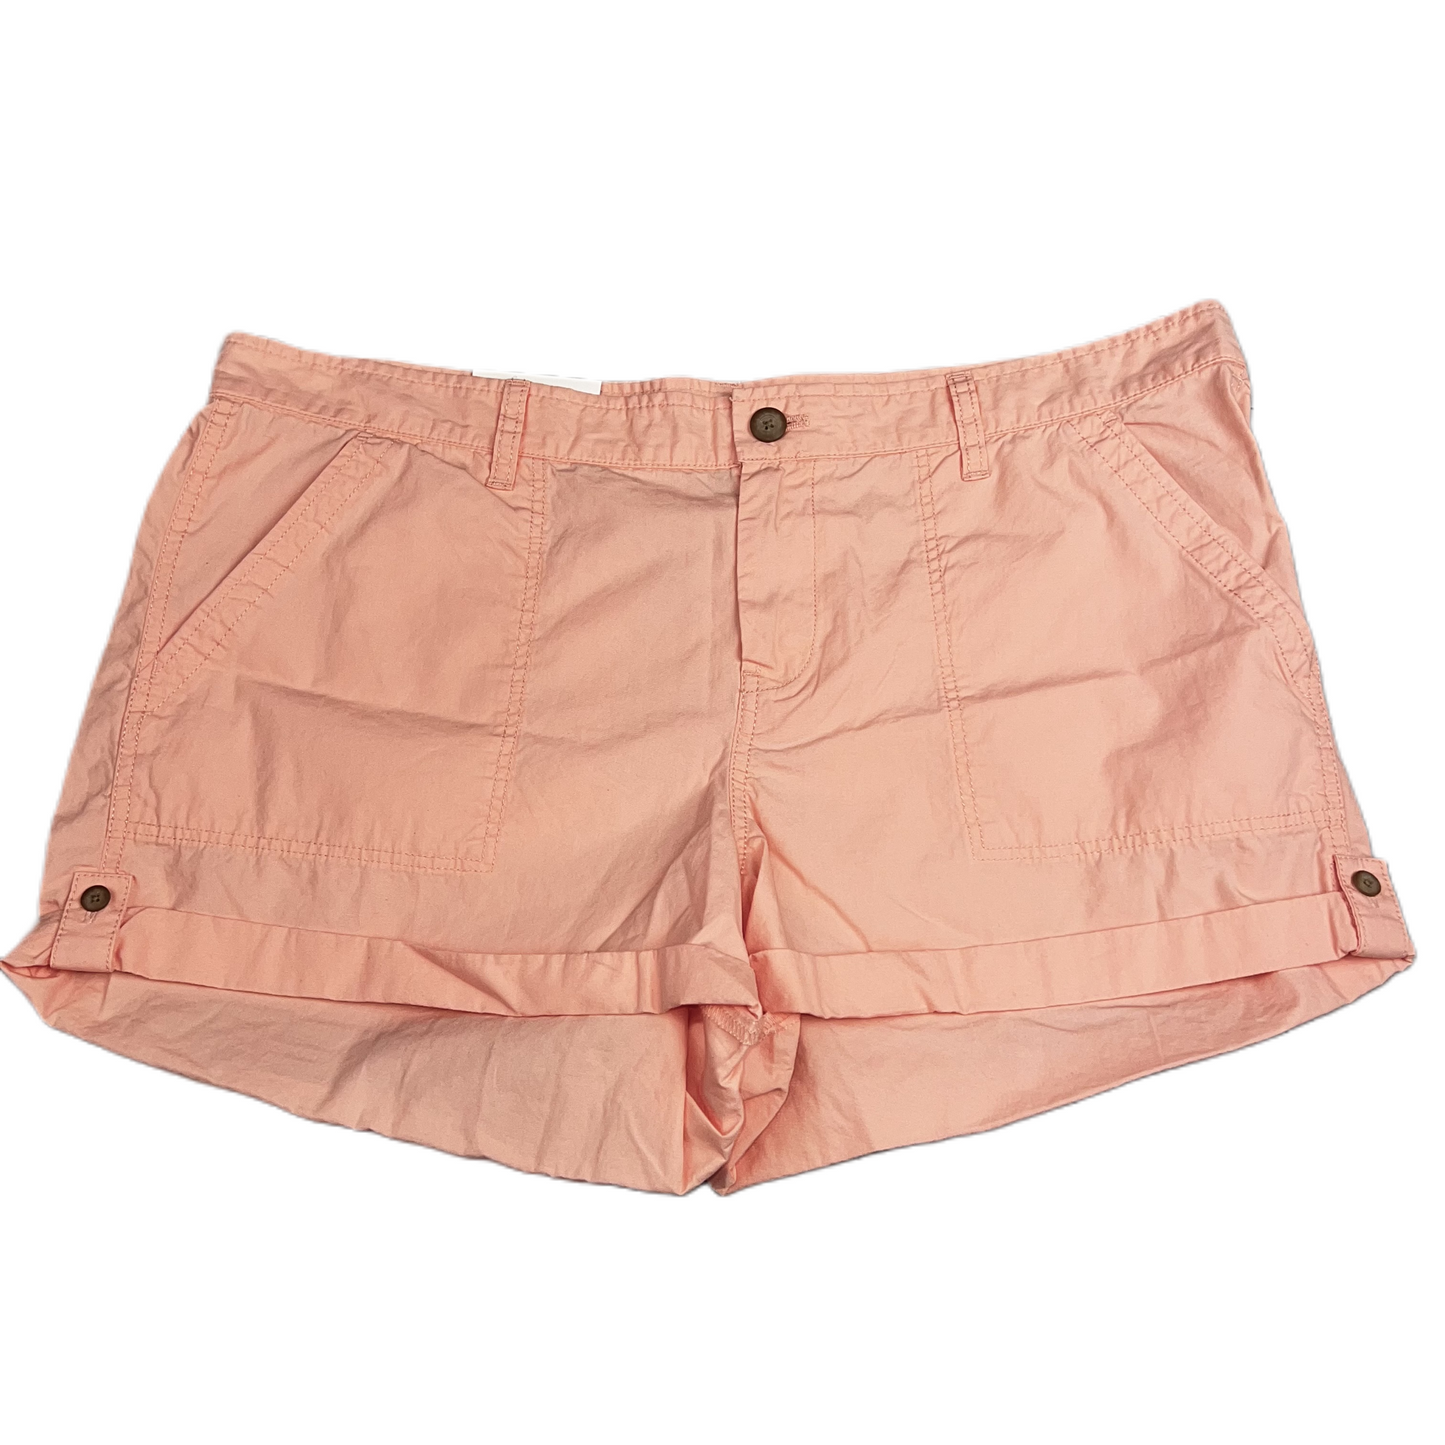 Pink Shorts By Gap, Size: 16